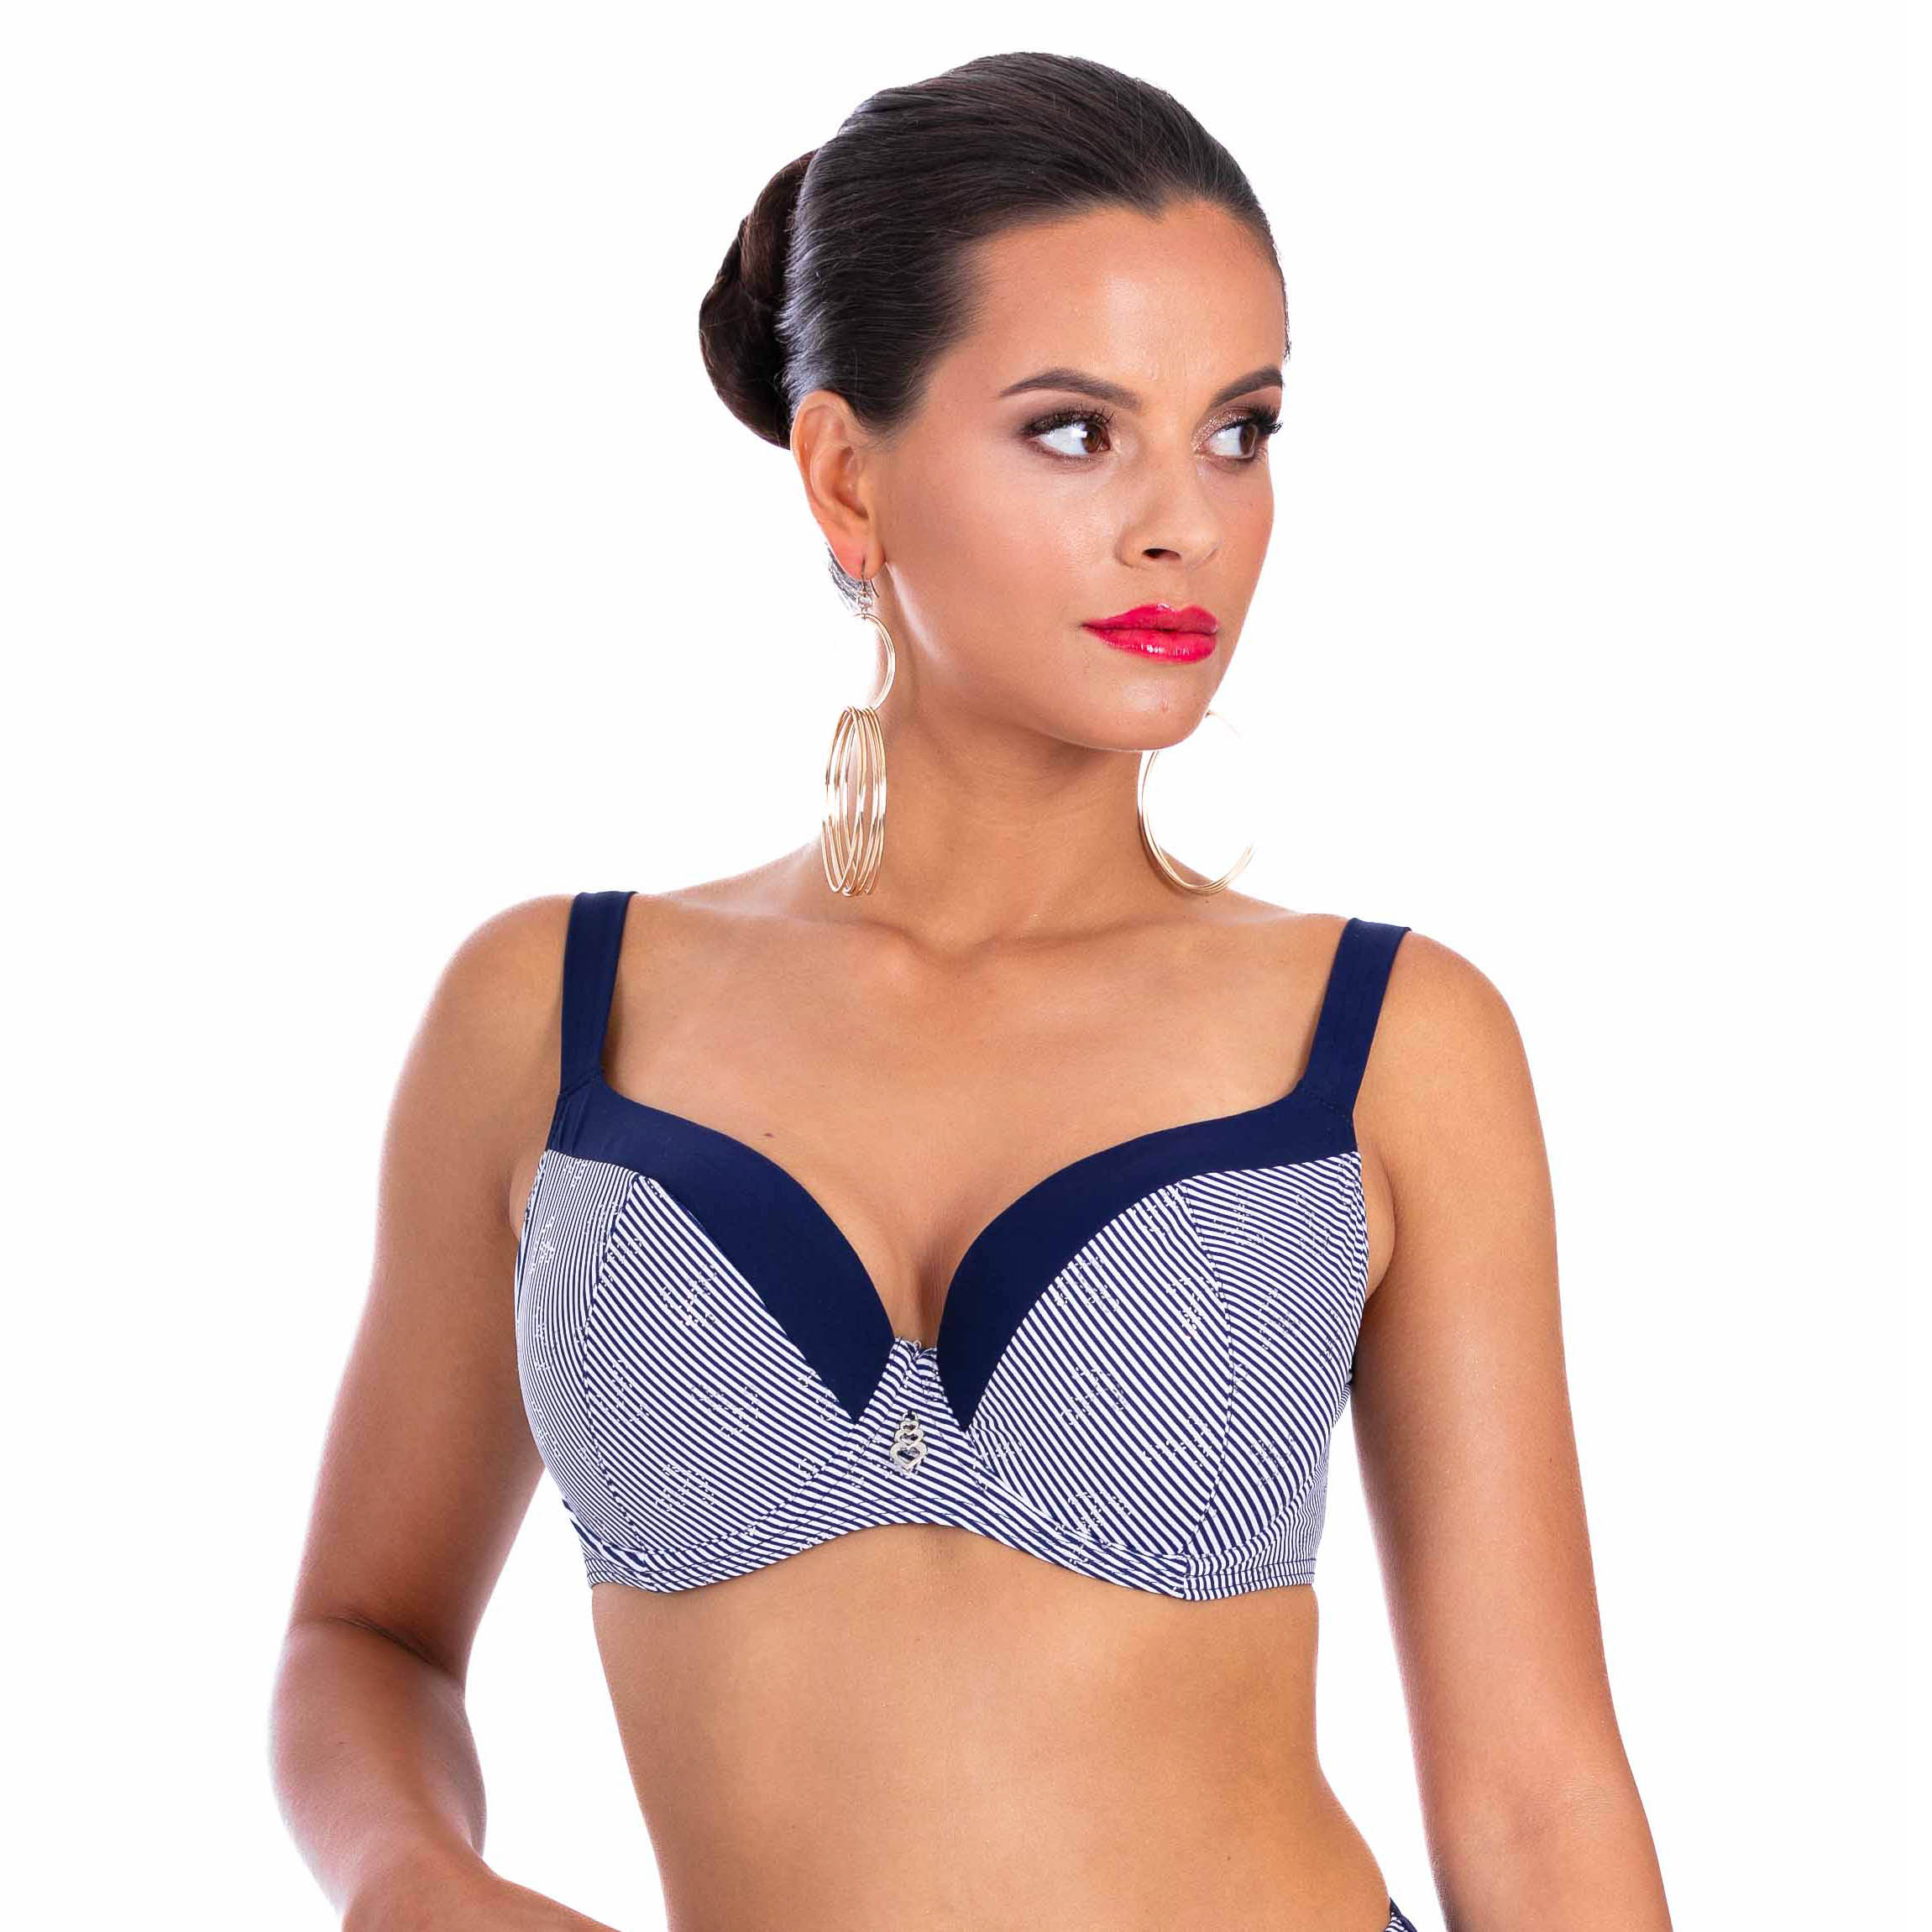 1pc Comfortable Wide Strap Bra With Sponge Cushion, Thin Cup